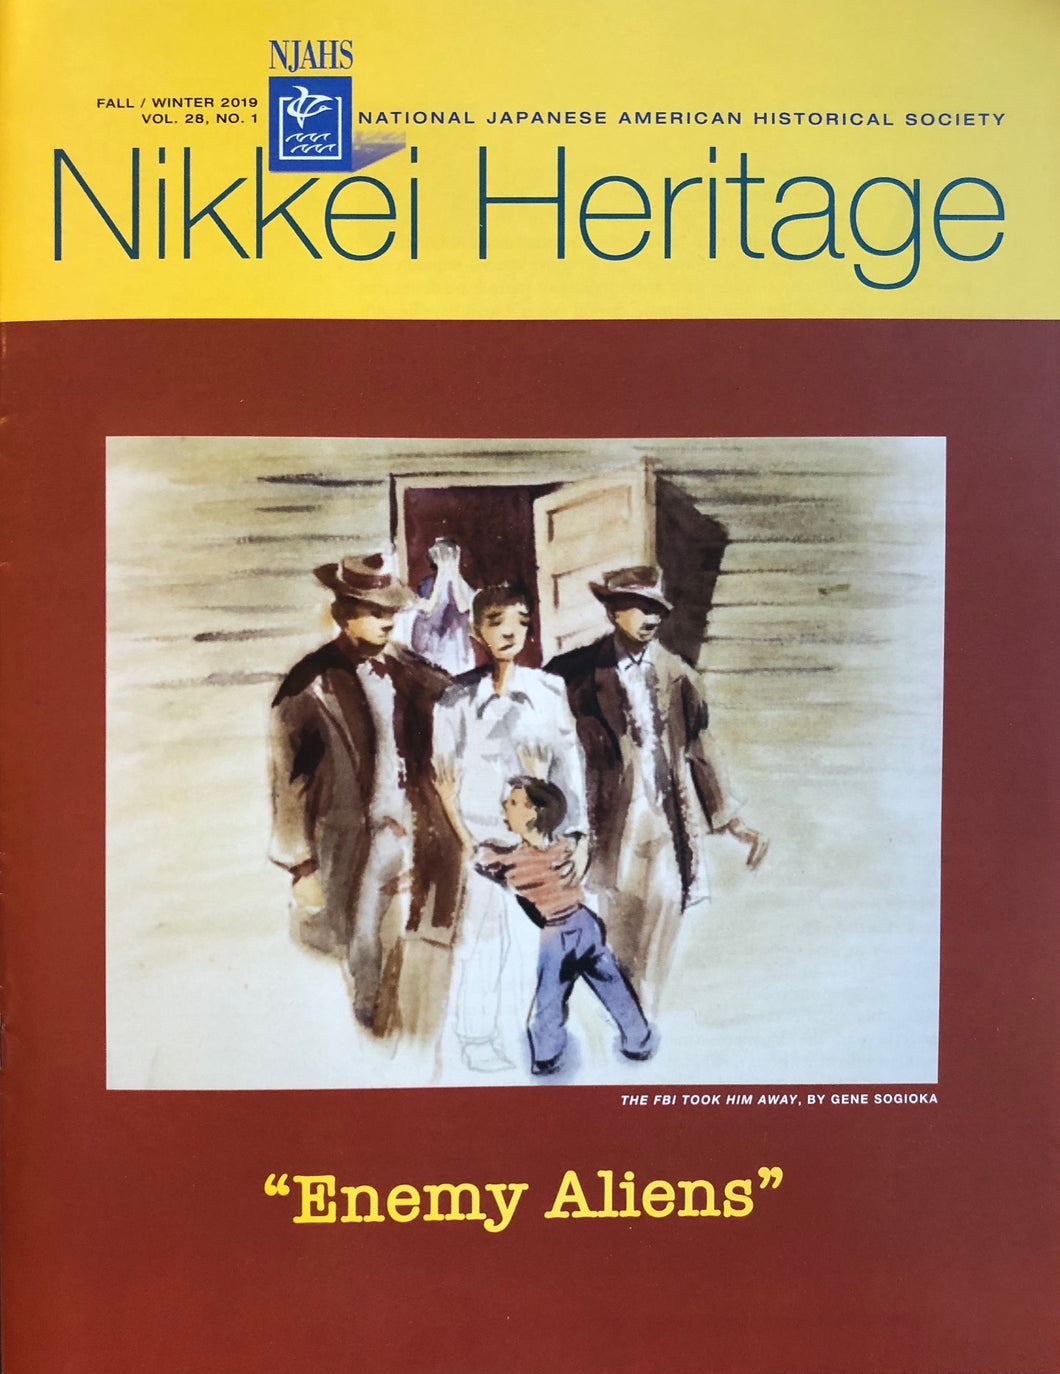 Nikkei Heritage - Enemy Aliens Special Issue